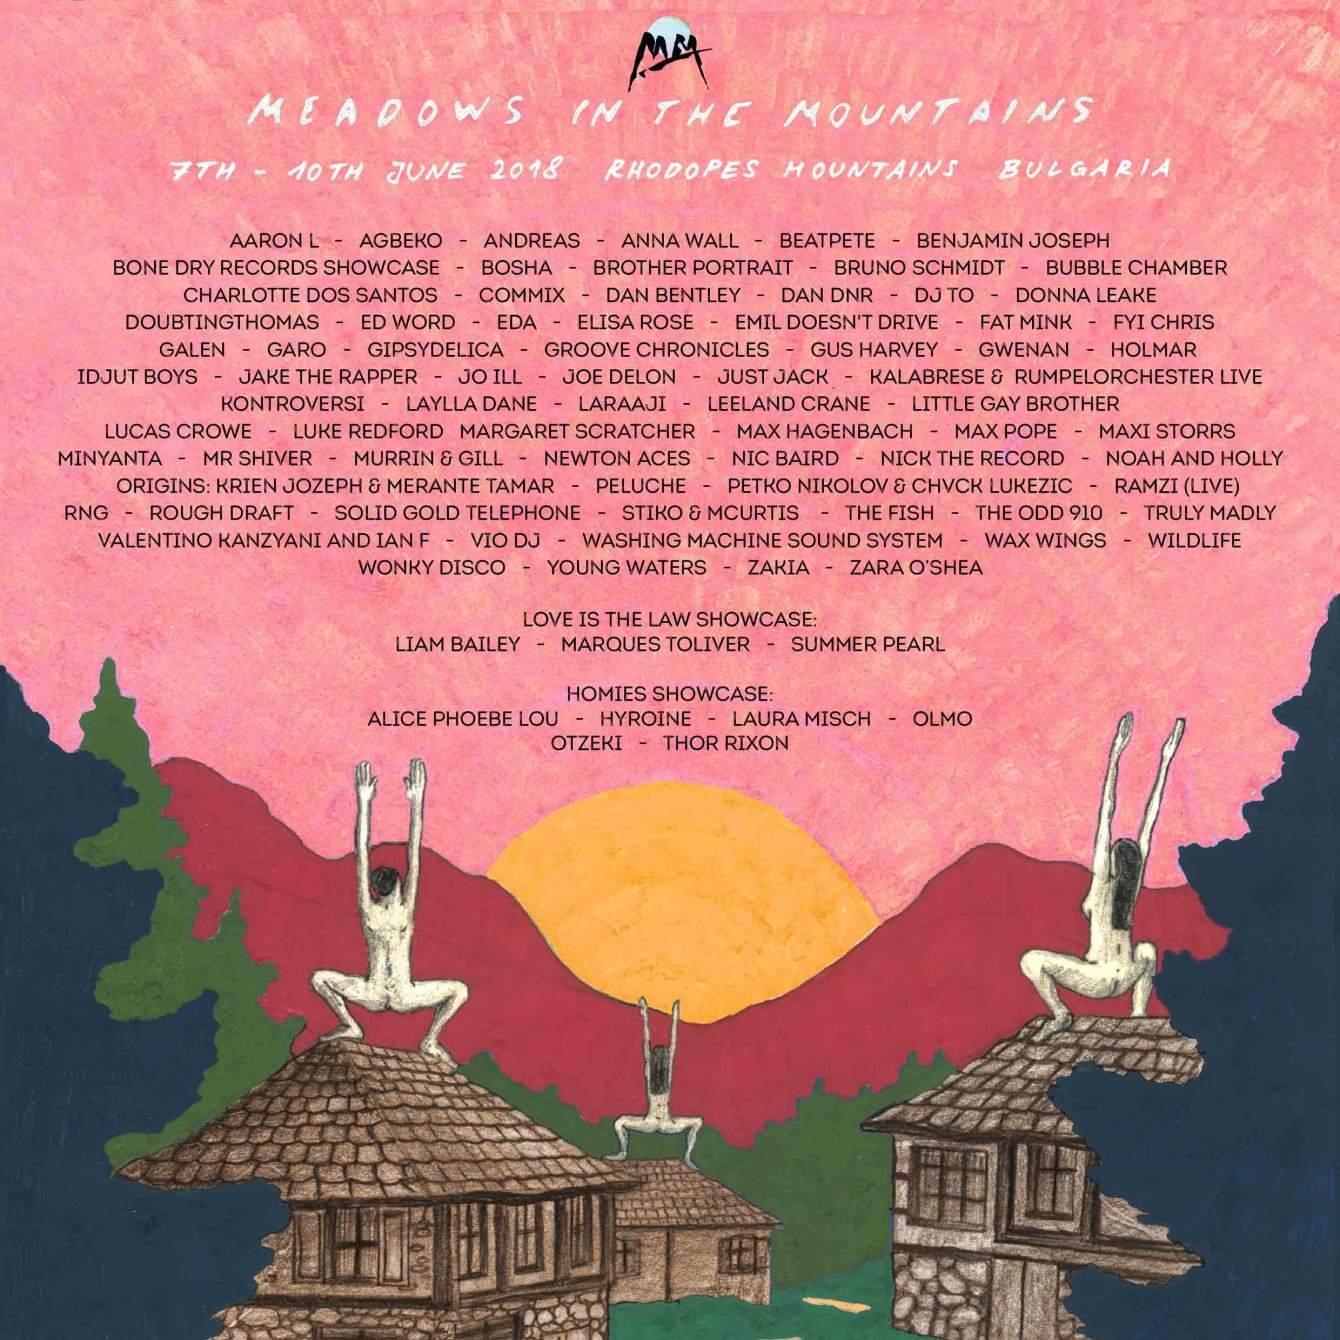 Meadows in the Mountains Festival 2018 - Página trasera